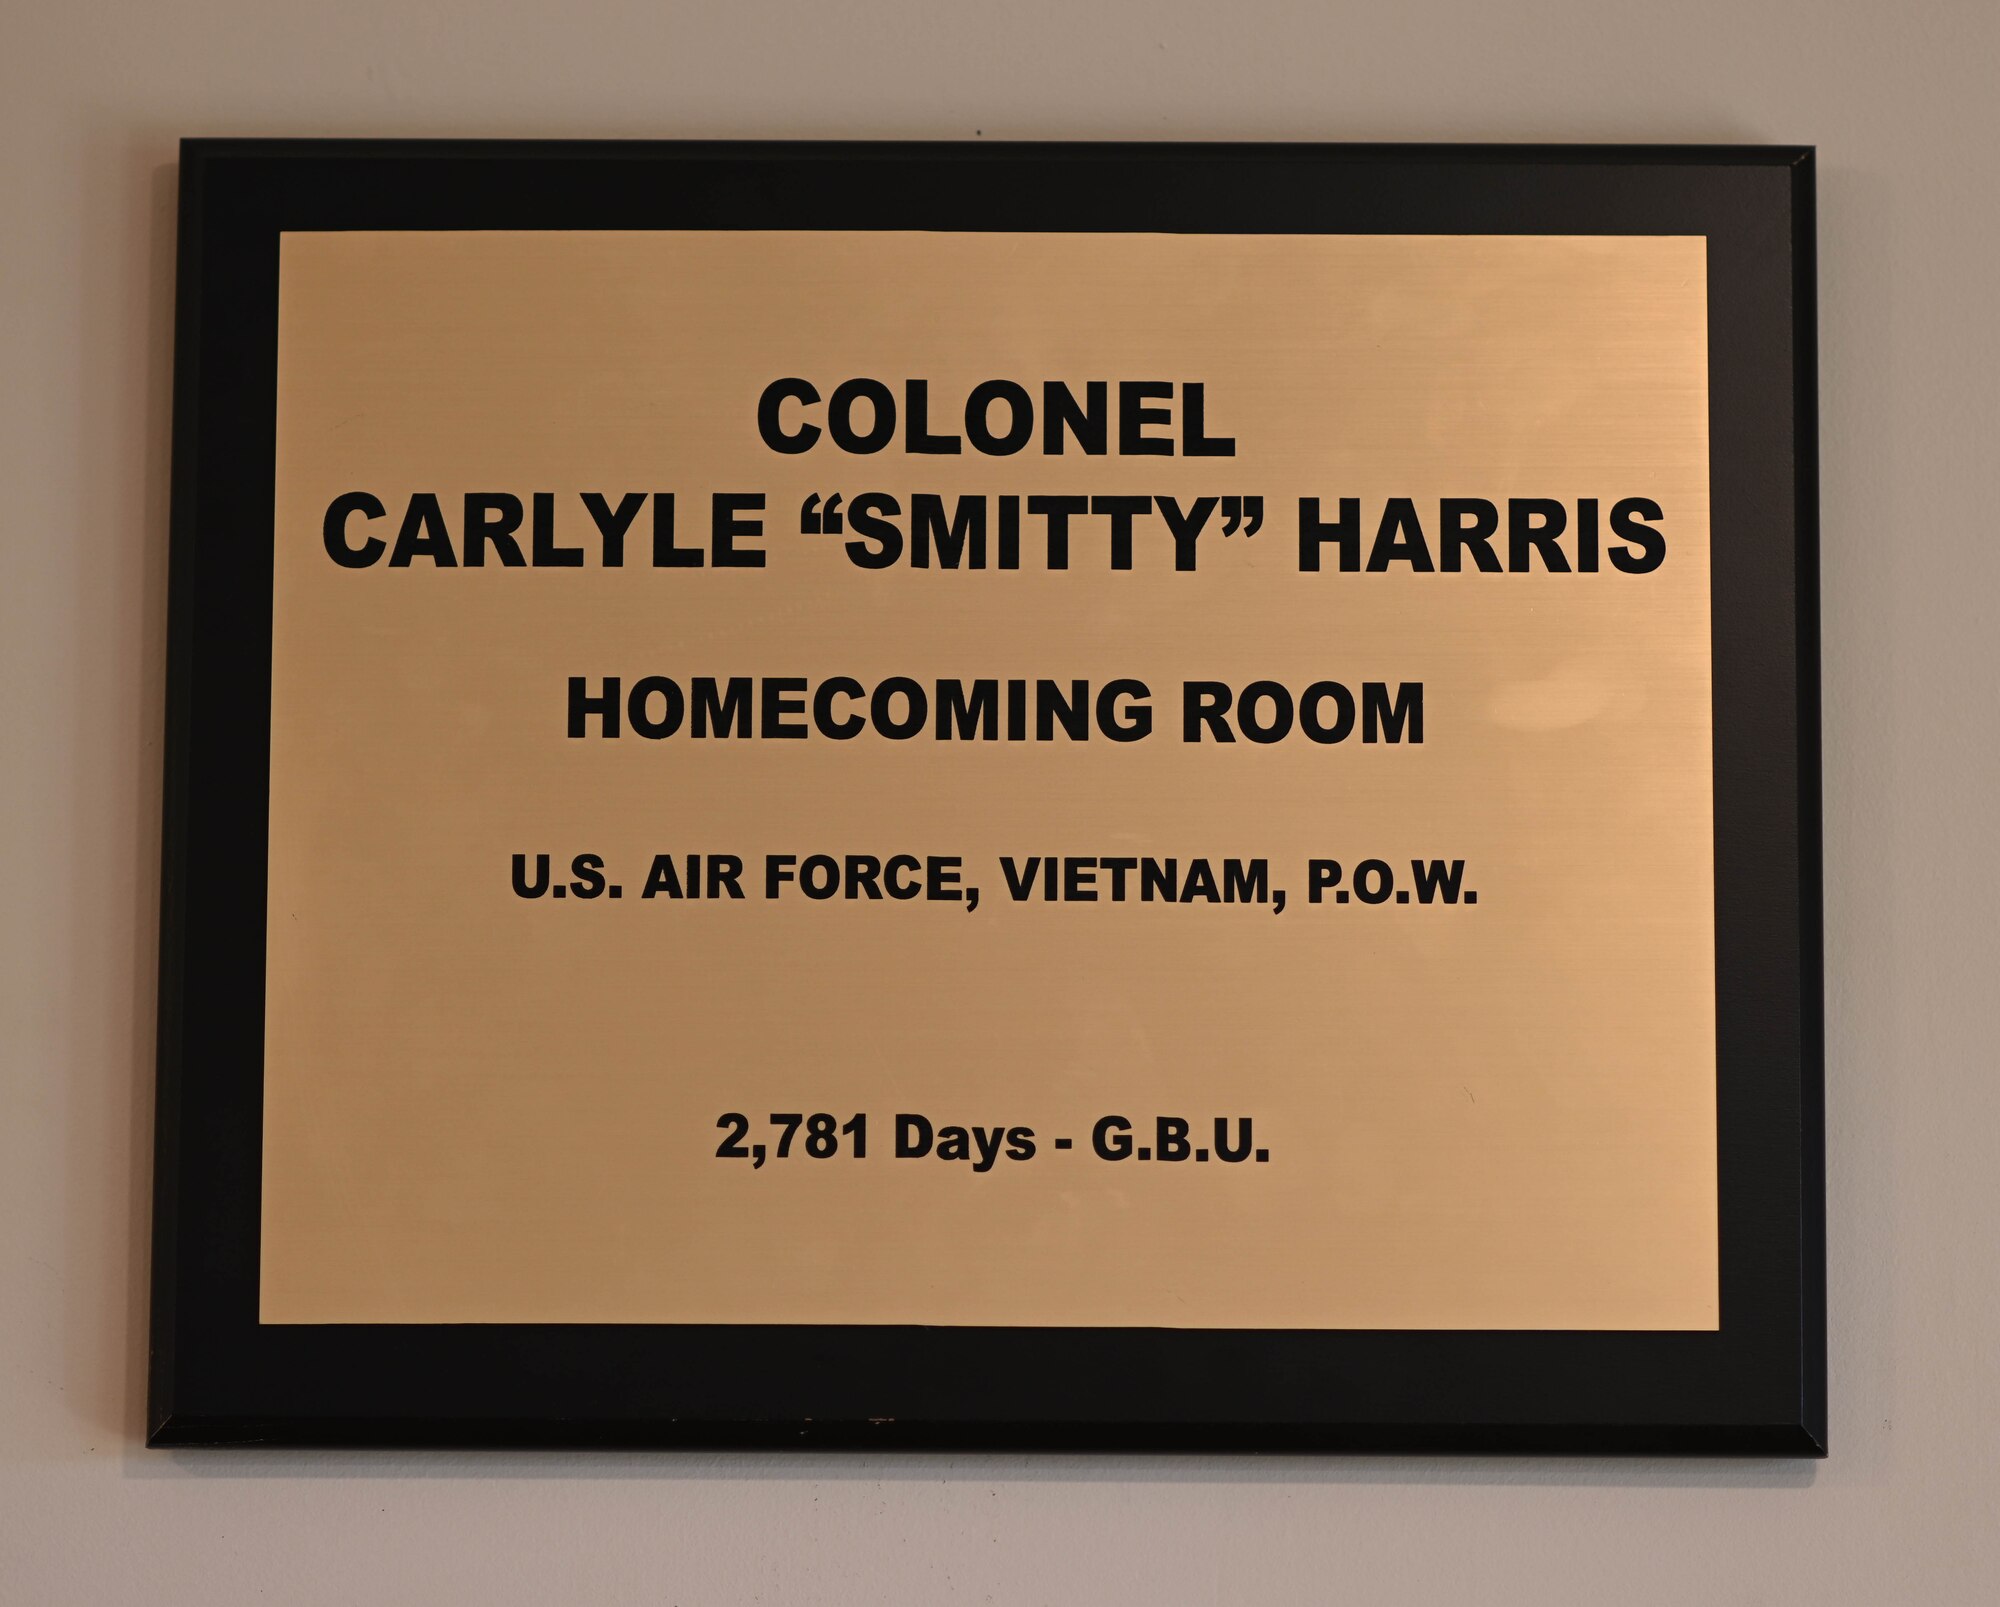 A plaque with Ret. Col. Carlyle “Smitty” Harris’ name is placed above a room dedicated to Harris. Harris and other POWs would use a tap code to tap the acronym “G.B.U.”, which stands for “God Bless You”. (U.S. Air Force photo by Airman 1st Class Davis Donaldson)